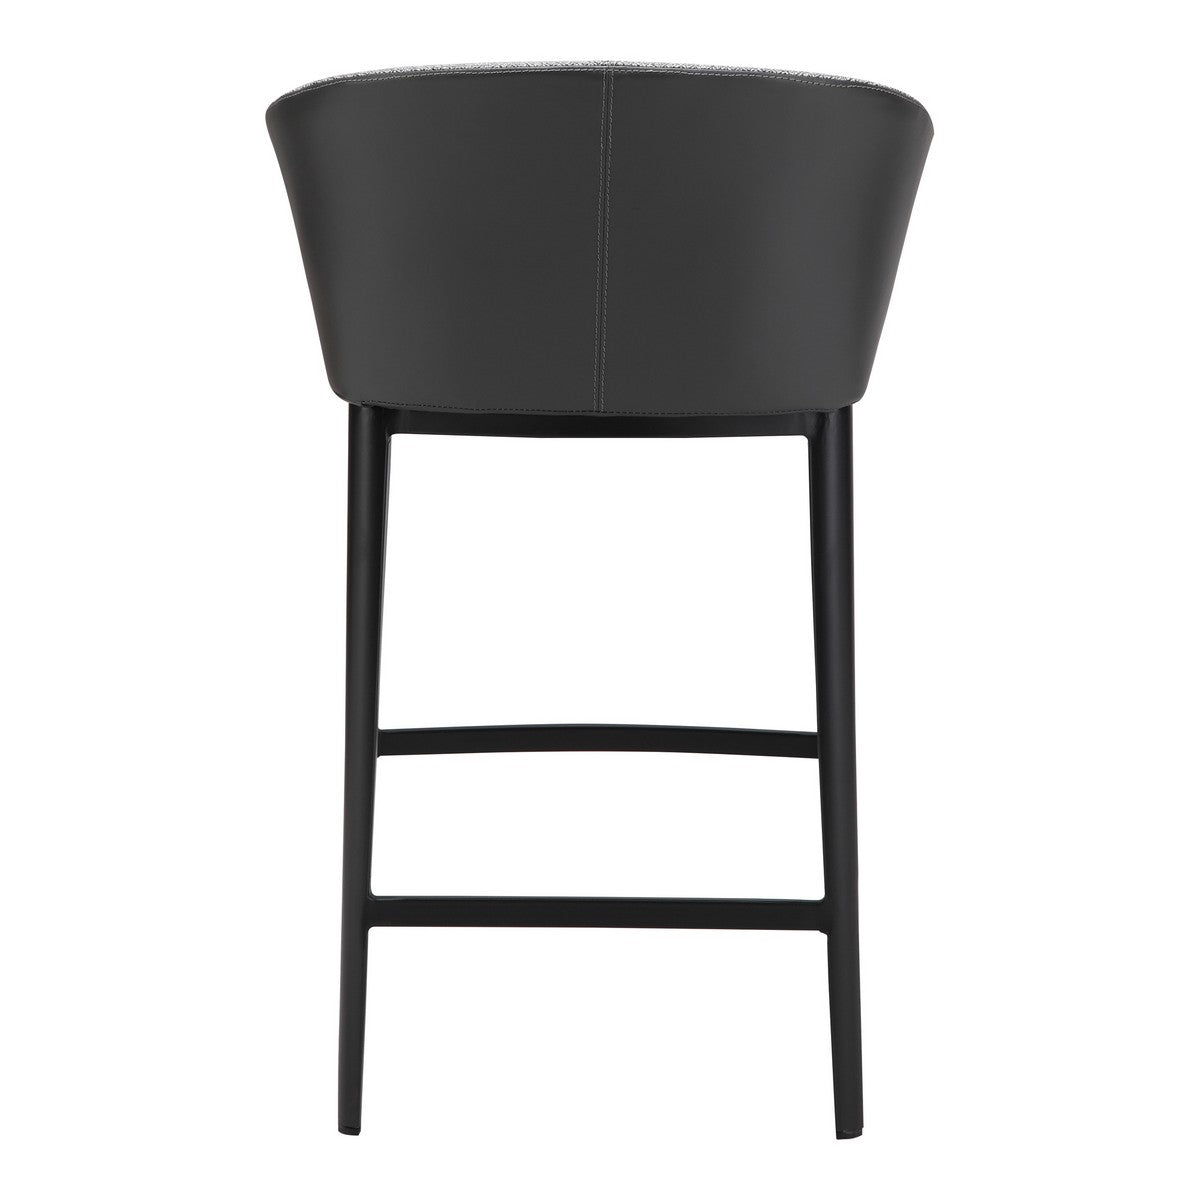 Moe's Home Collection Beckett Counter Stool Grey - EJ-1028-15